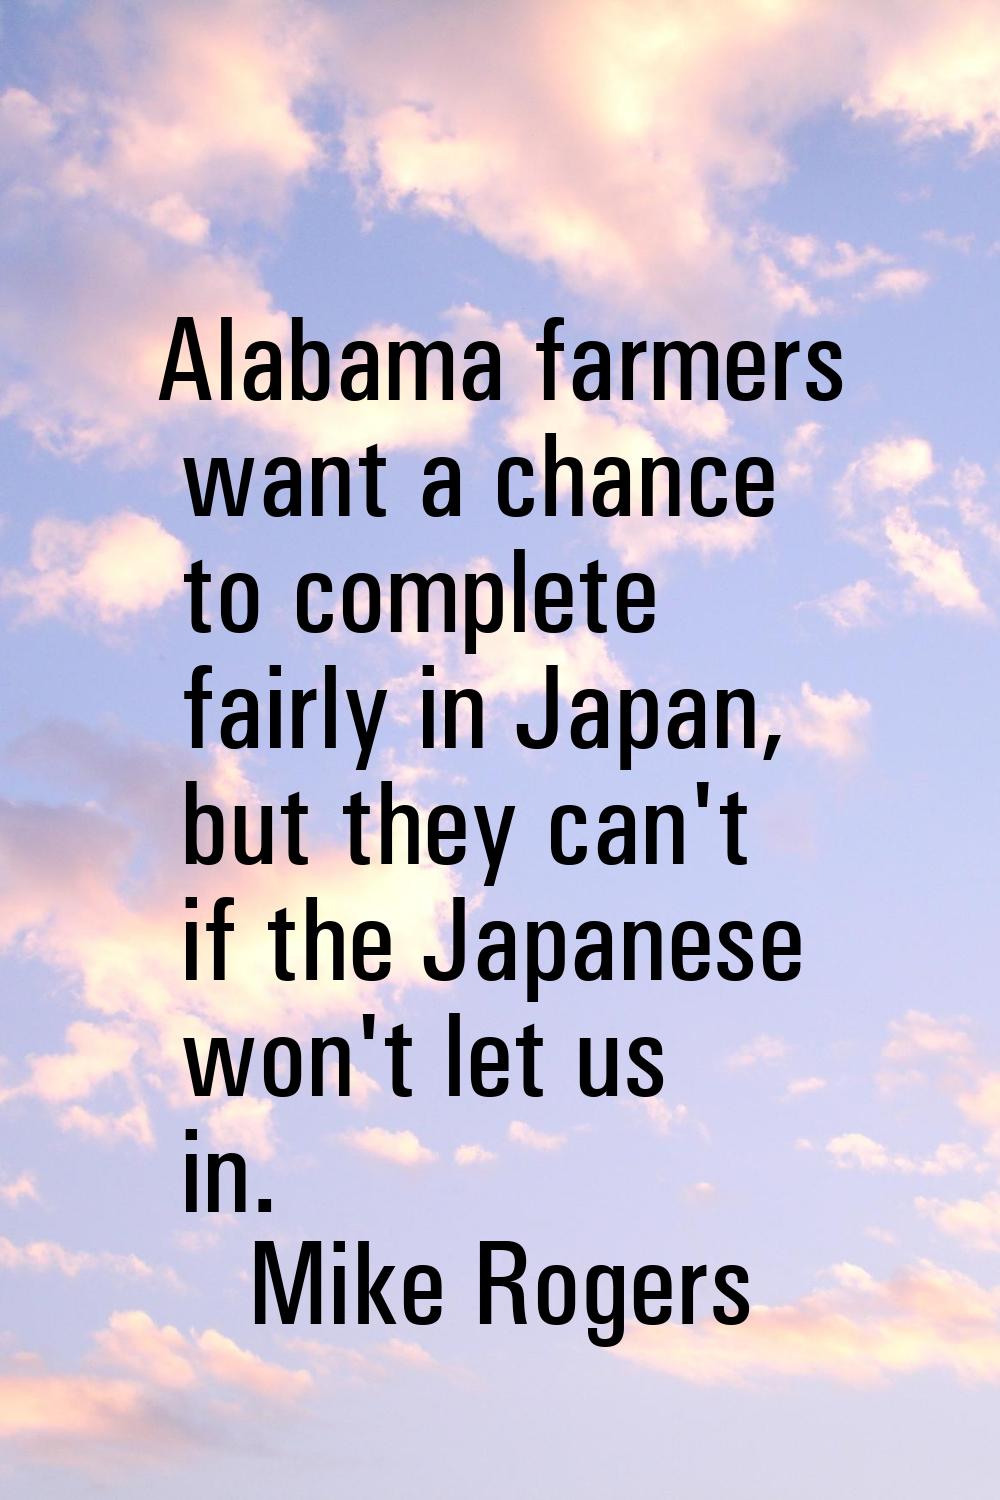 Alabama farmers want a chance to complete fairly in Japan, but they can't if the Japanese won't let